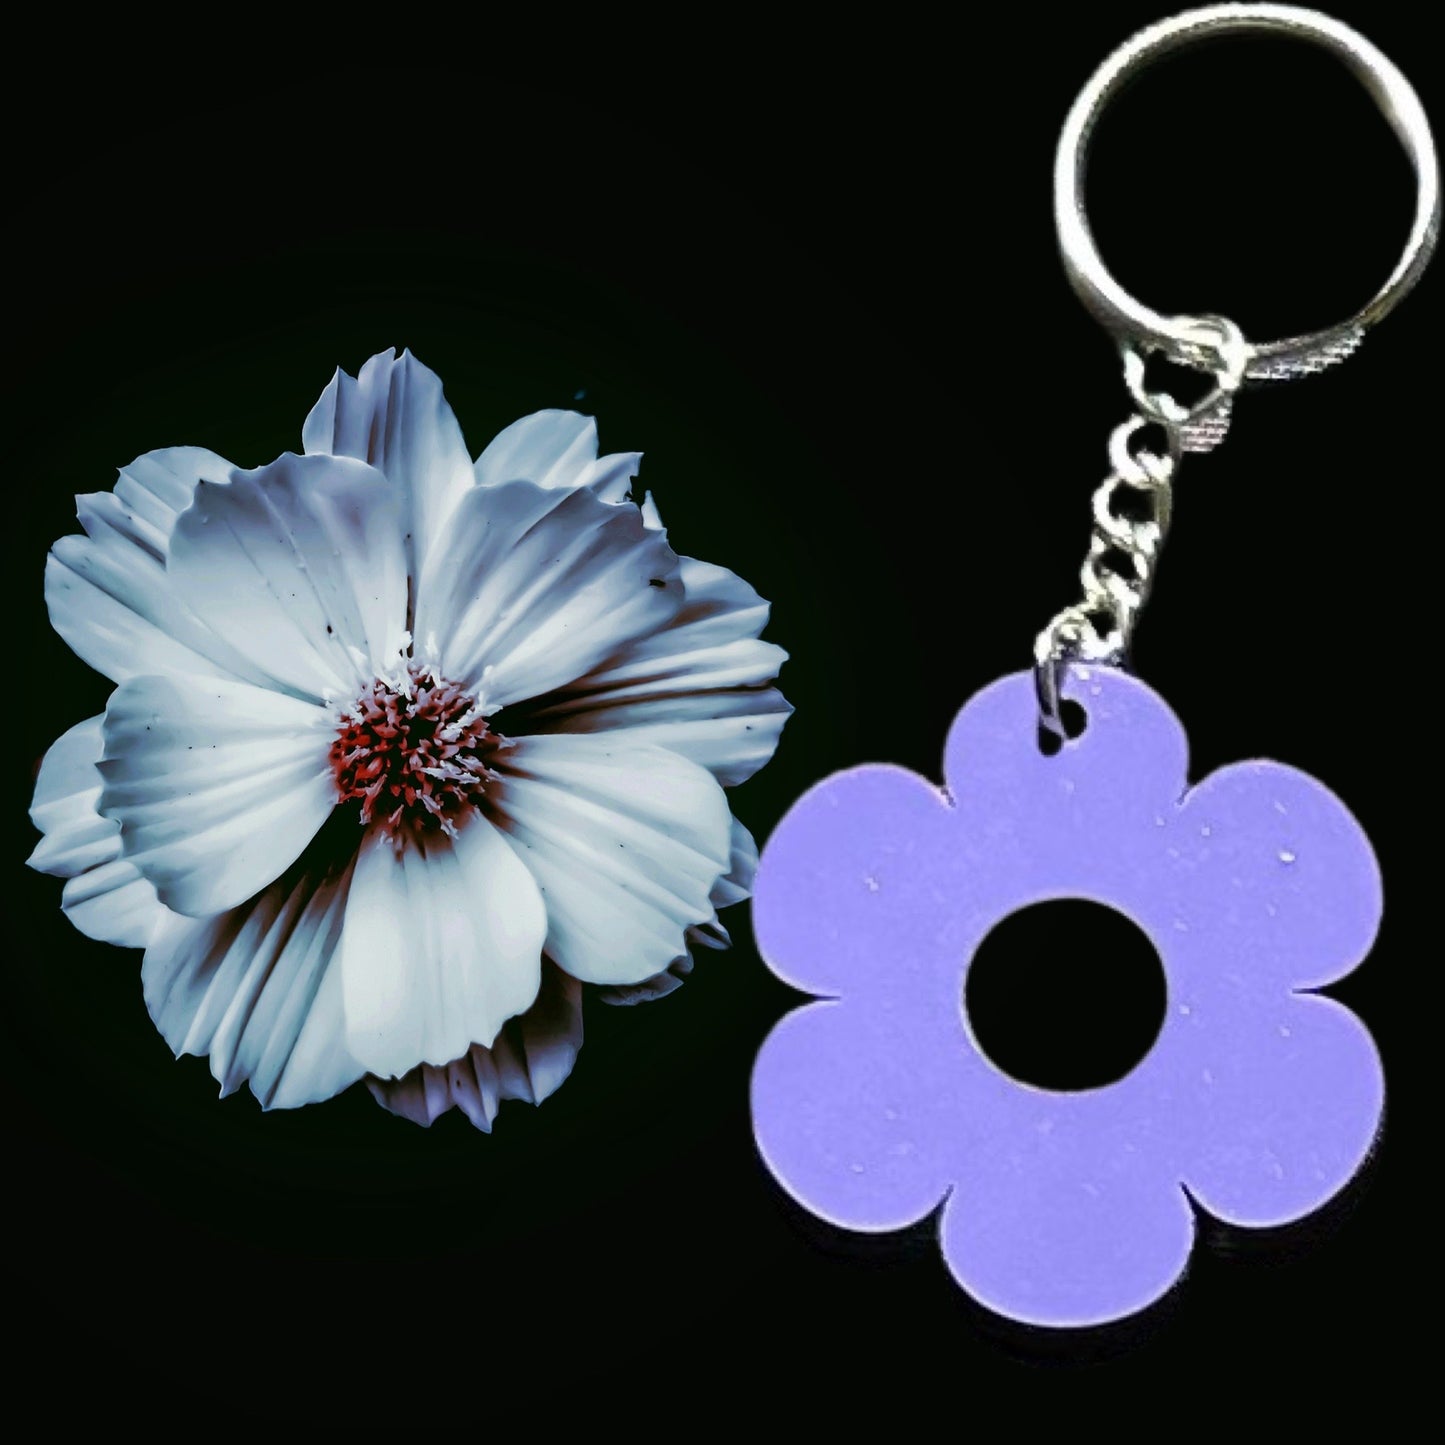 Retro Flowers Laser Cut Lightweight Acrylic Keychains- Multiple Colors